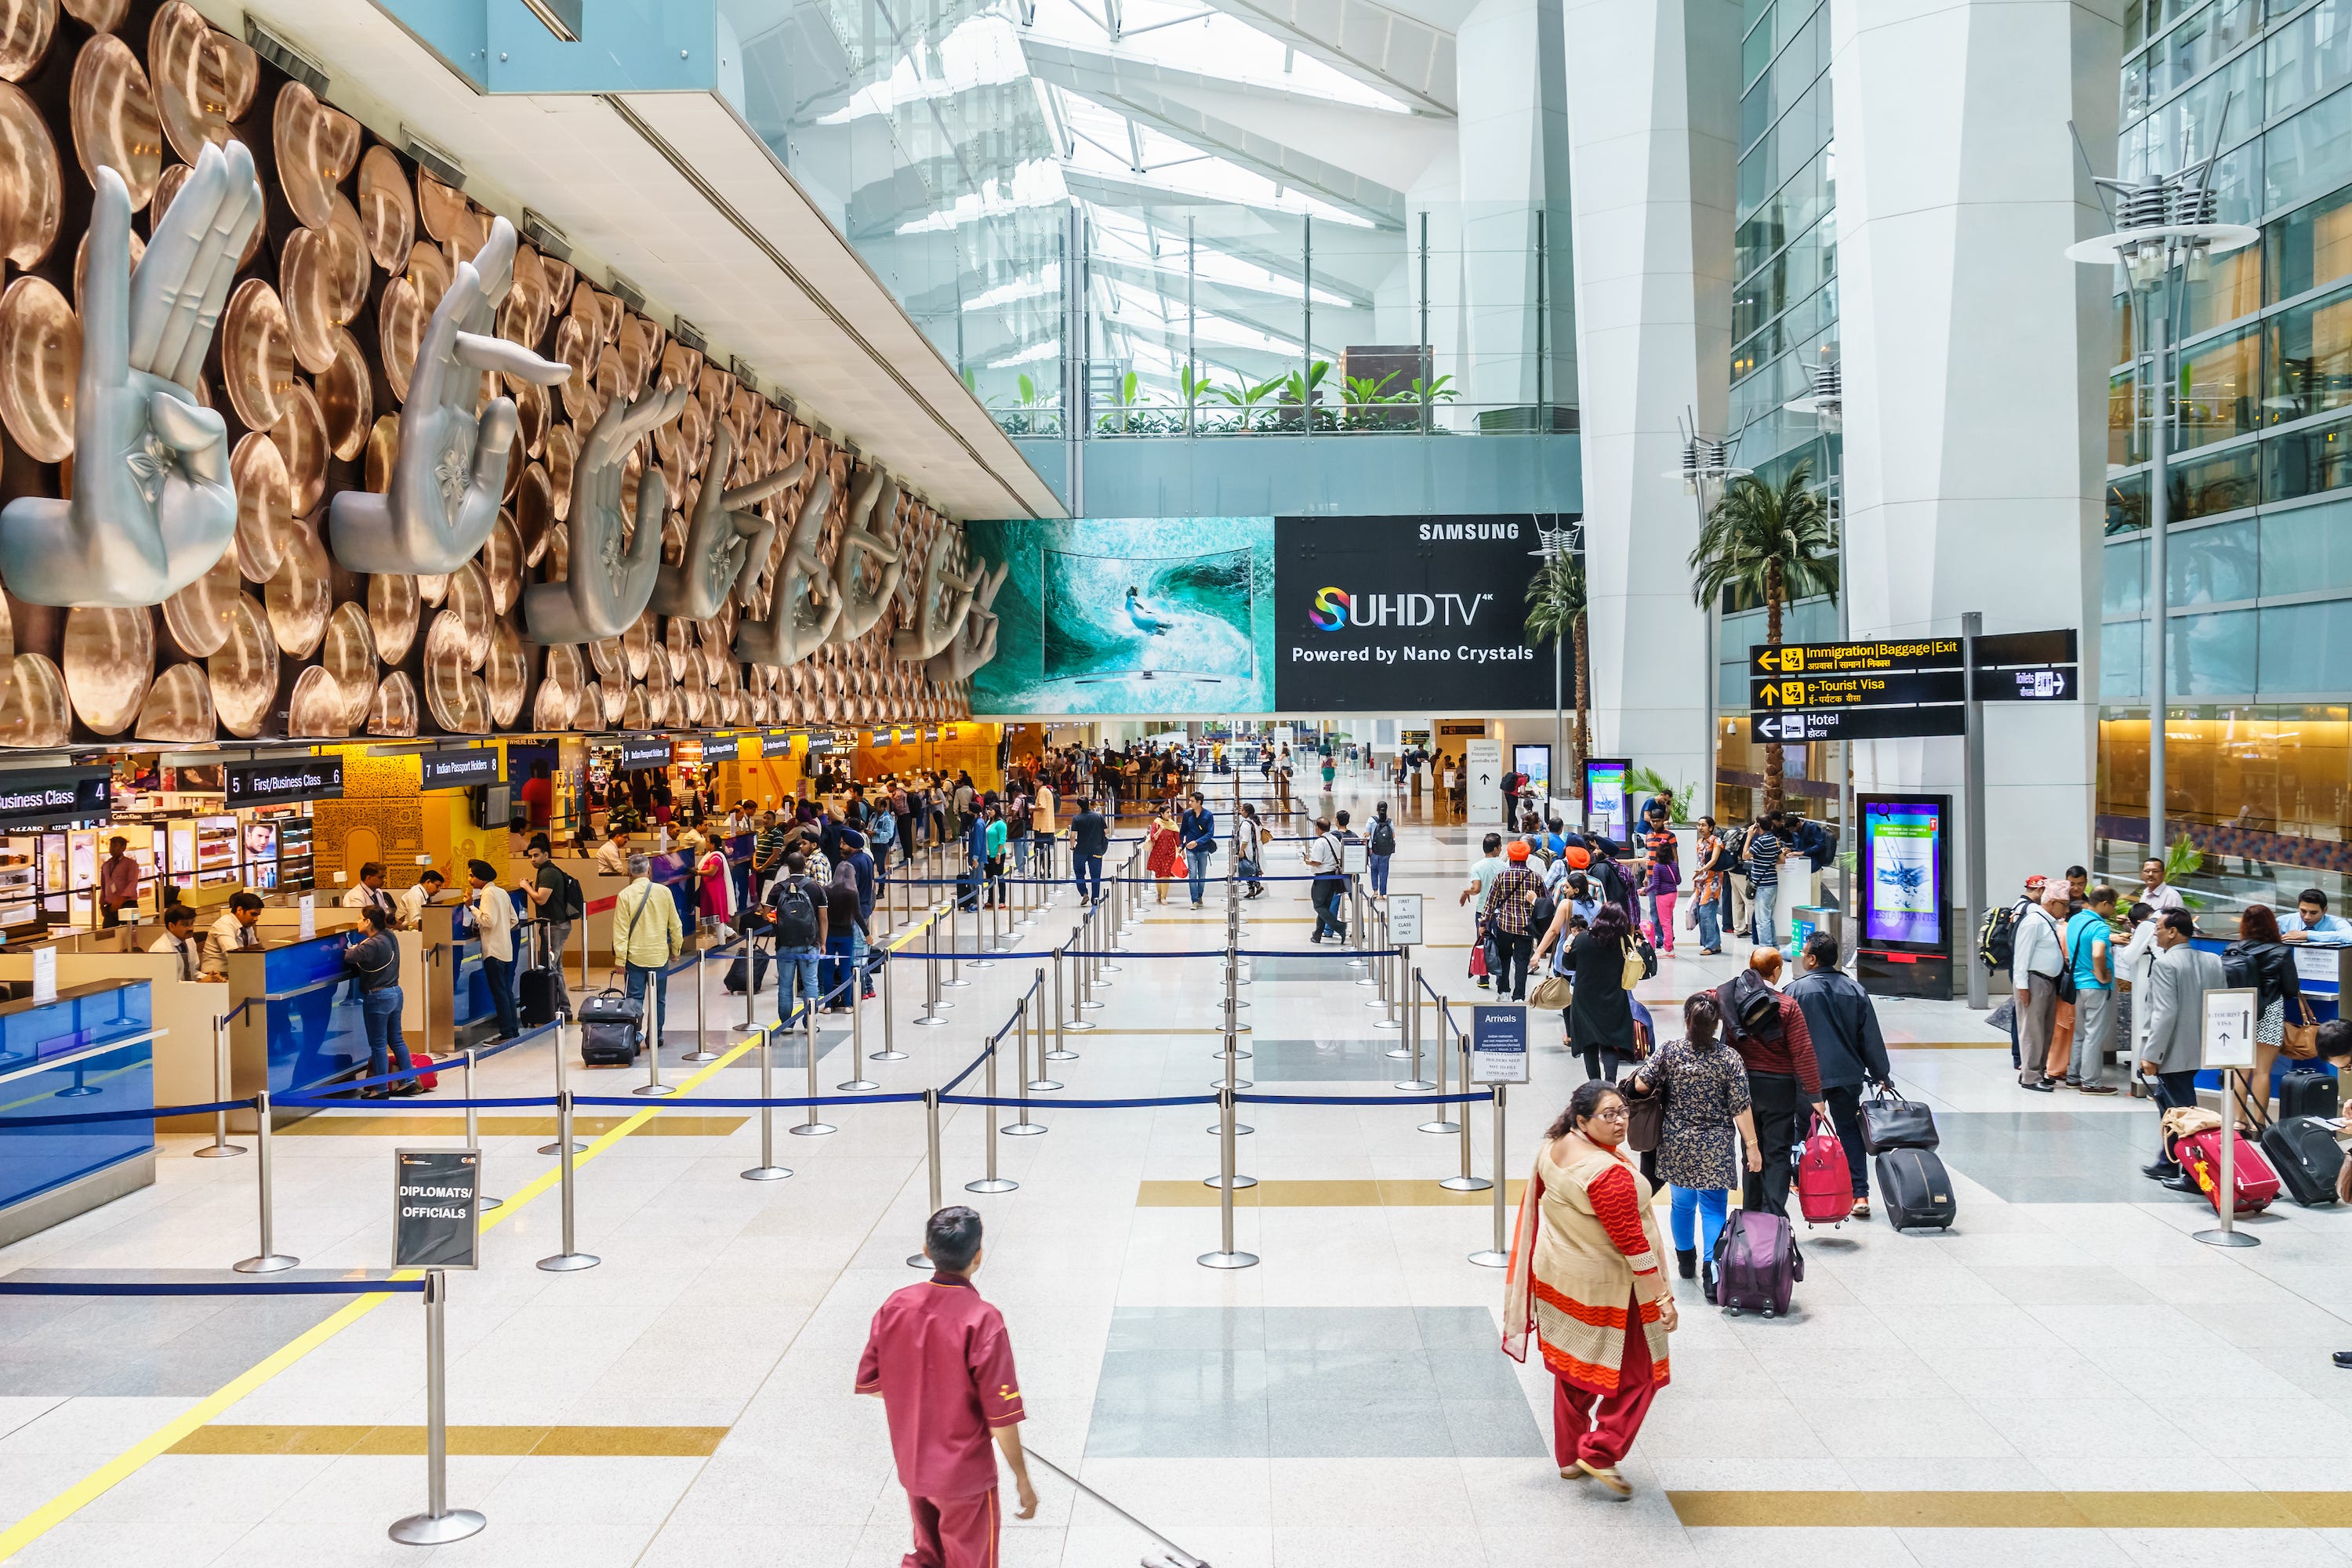 <p><strong>Passengers:</strong> 72.2 million</p><p><strong> 2022 ranking: </strong>9th</p><p>Delhi's main airport, Indira Gandhi International Airport, saw a 21.4% increase in year-on-year traffic. While it has dropped a place this year, Delhi has grown significantly as a transport hub since 2019, when it sat at number 19 in the rankings.</p>